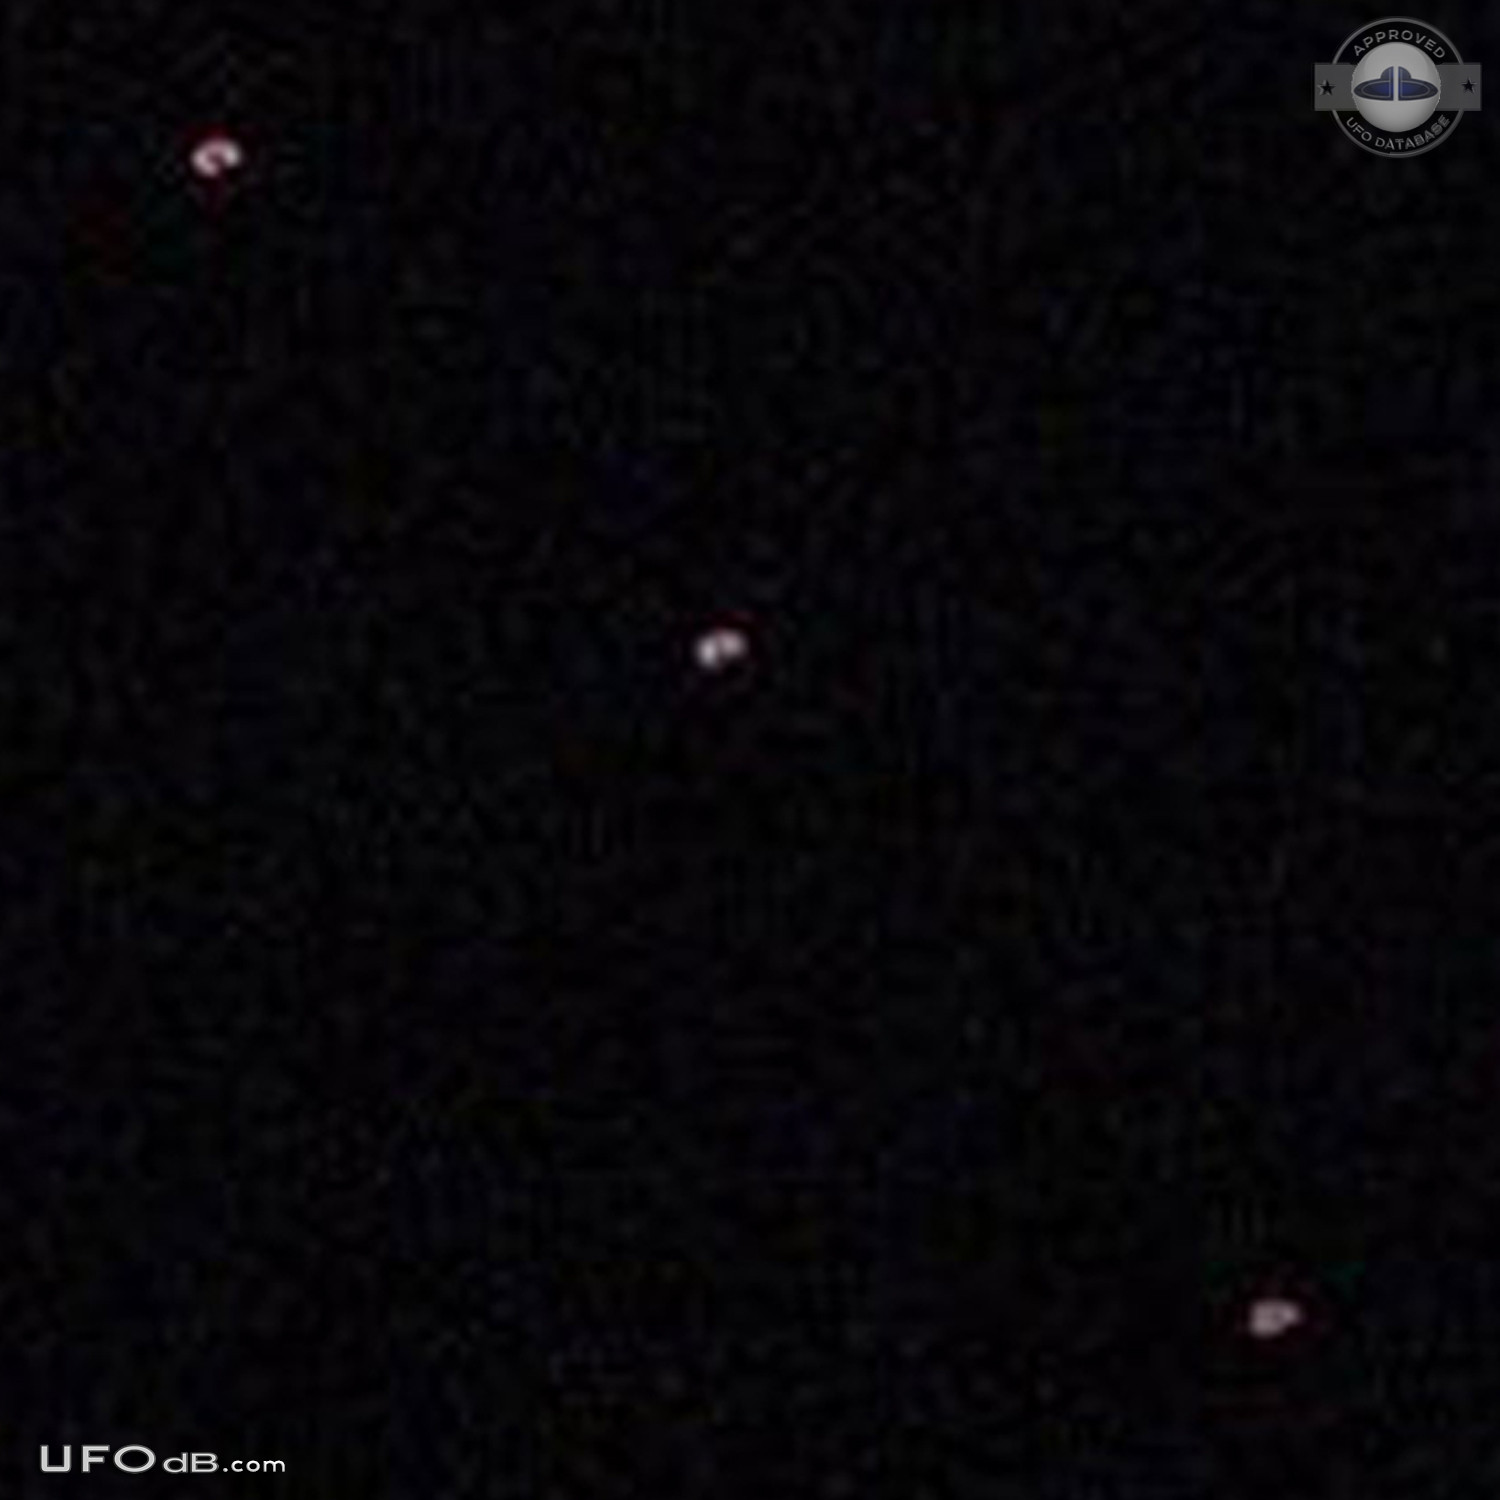 UFOs seen by several Marines over Camp Leatherneck, Afghanistan 2010 UFO Picture #490-3